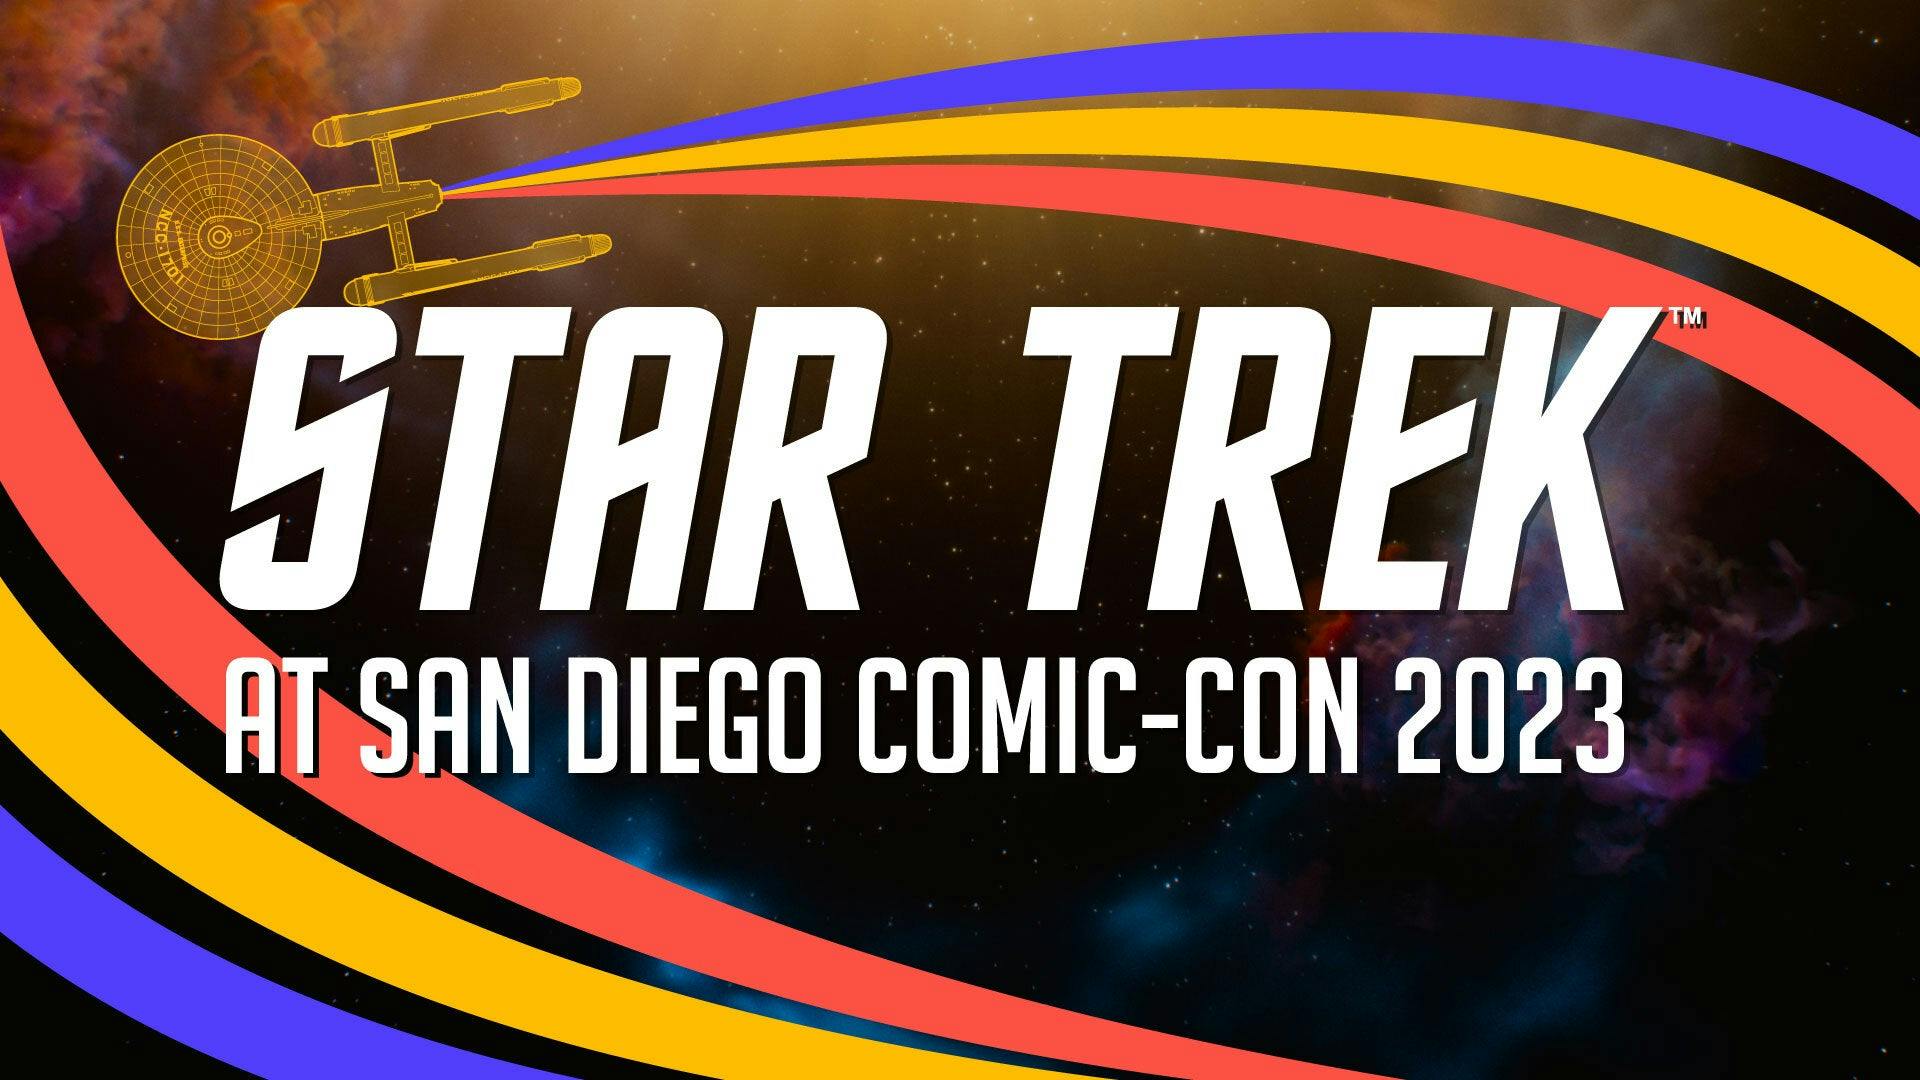 Illustrated banner with the text 'Star Trek at San Diego Comic Con 2023'